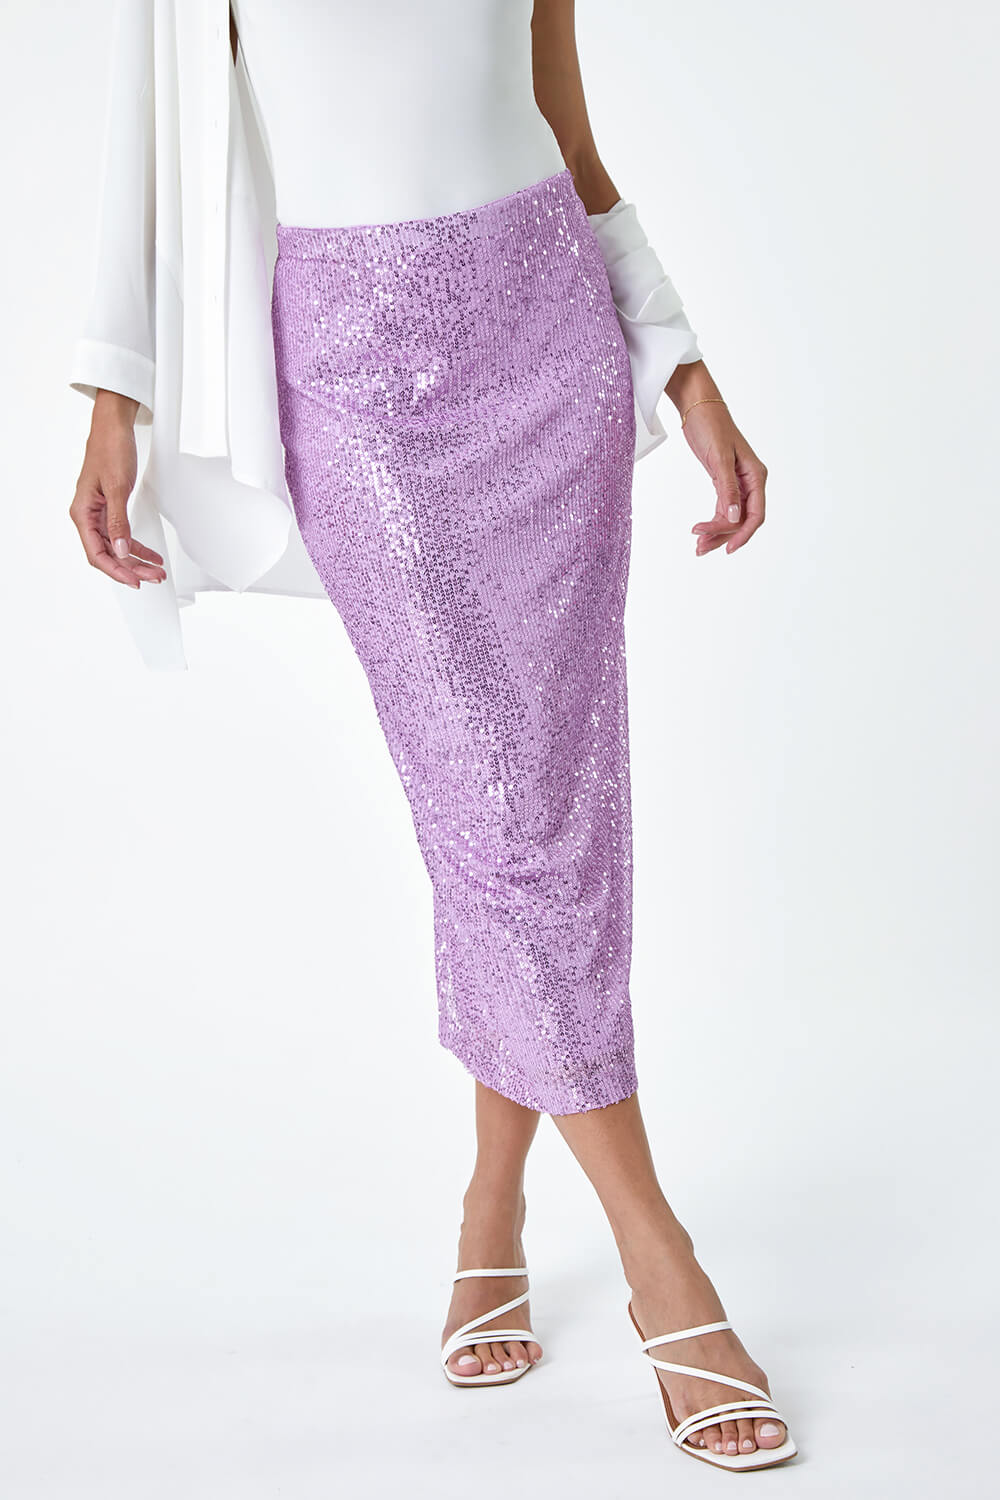 Lilac Sequin Sparkle Stretch Midi Skirt, Image 4 of 5